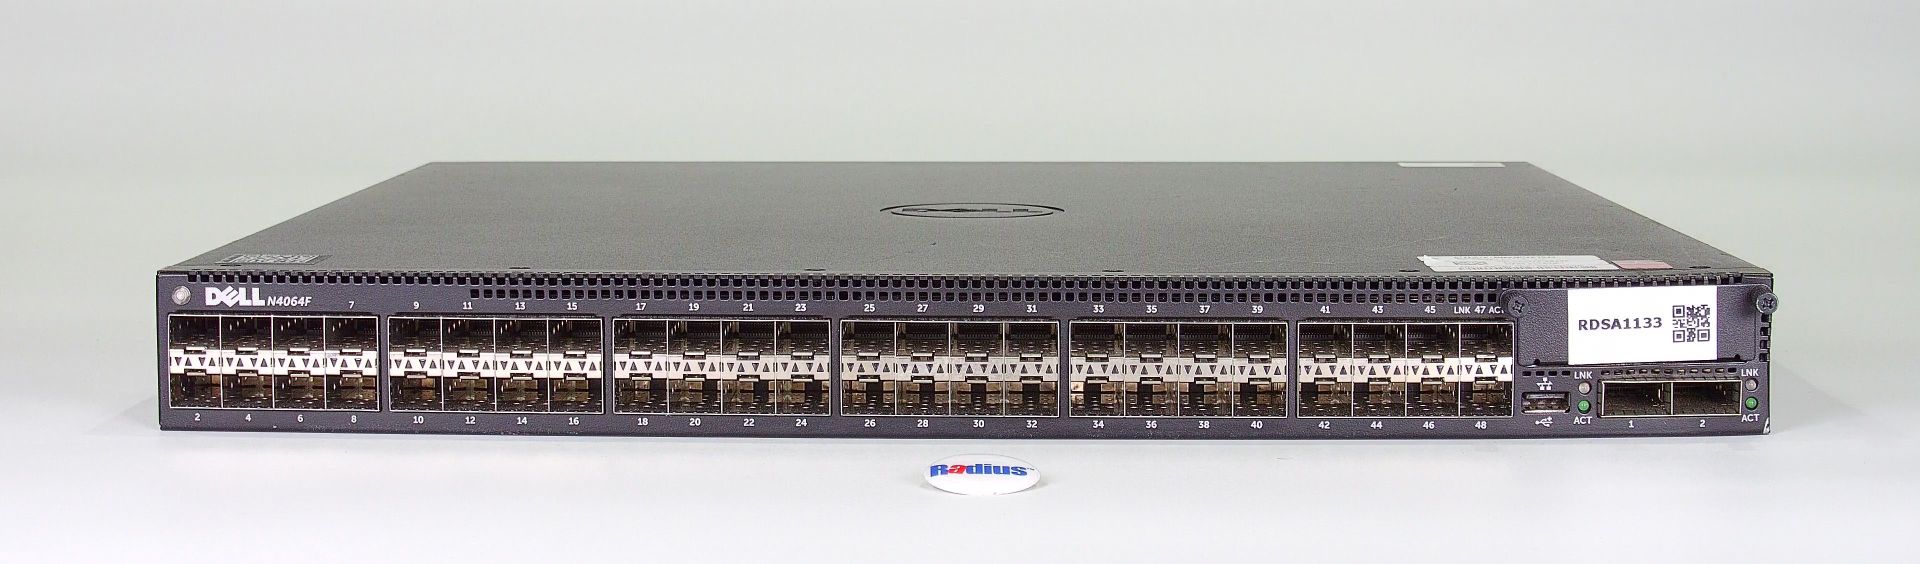 Dell Networking N4064F Switch